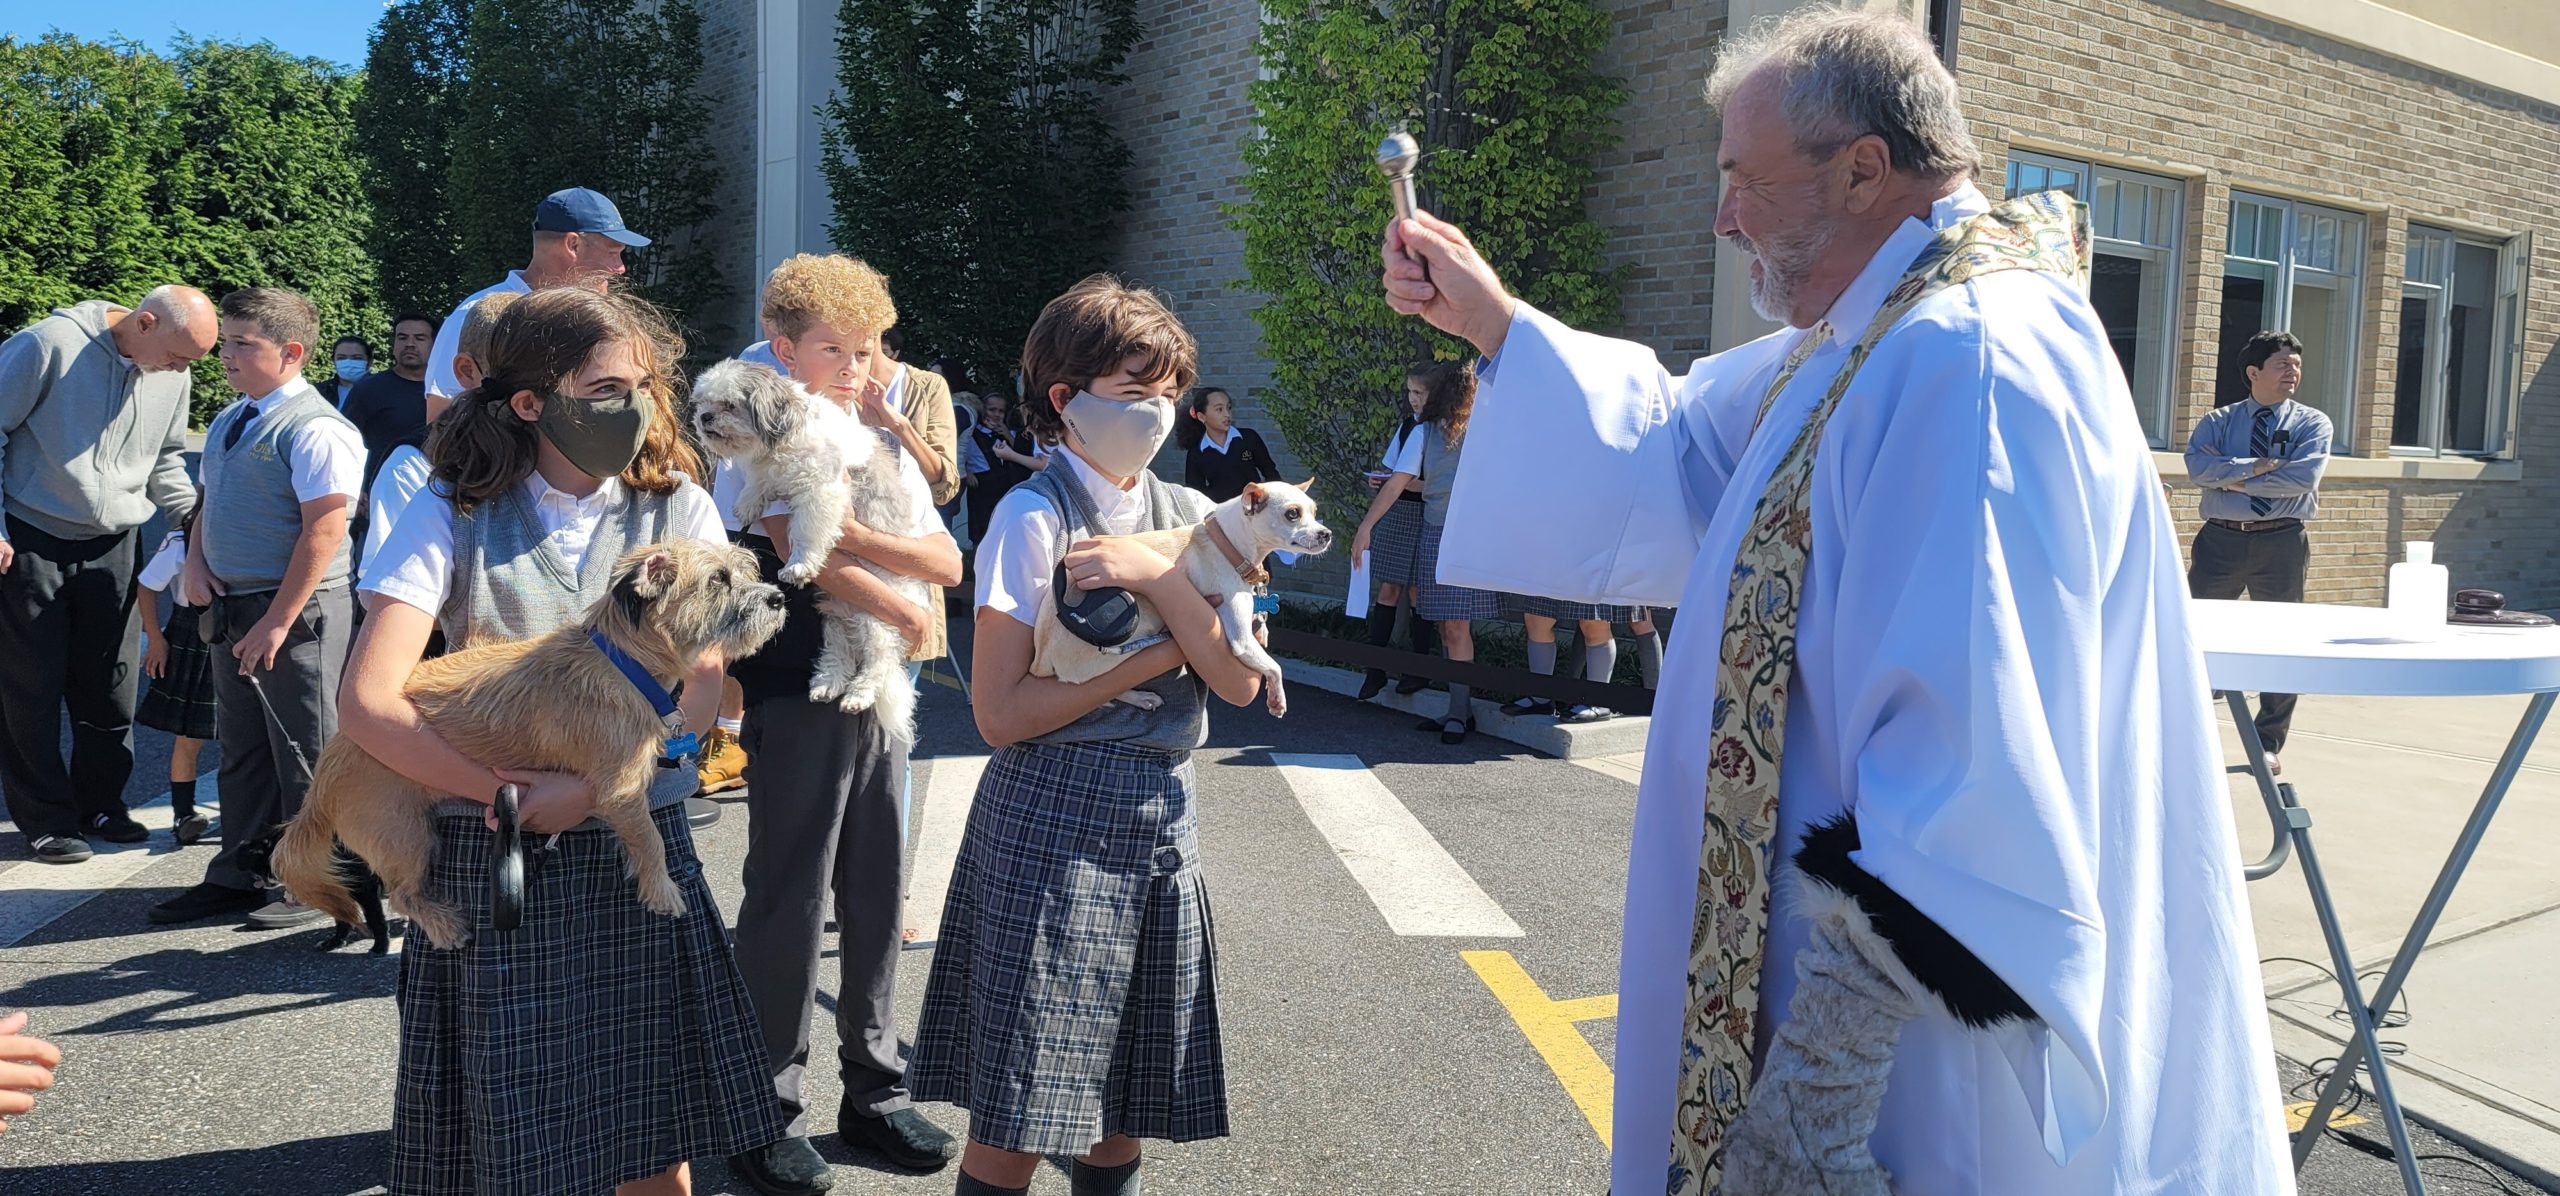 Our Lady of the Hamptons students Emma and LucyTillotson and Brian Spellman bring their pets to to be blessed during the annual Blessing of the Animals.